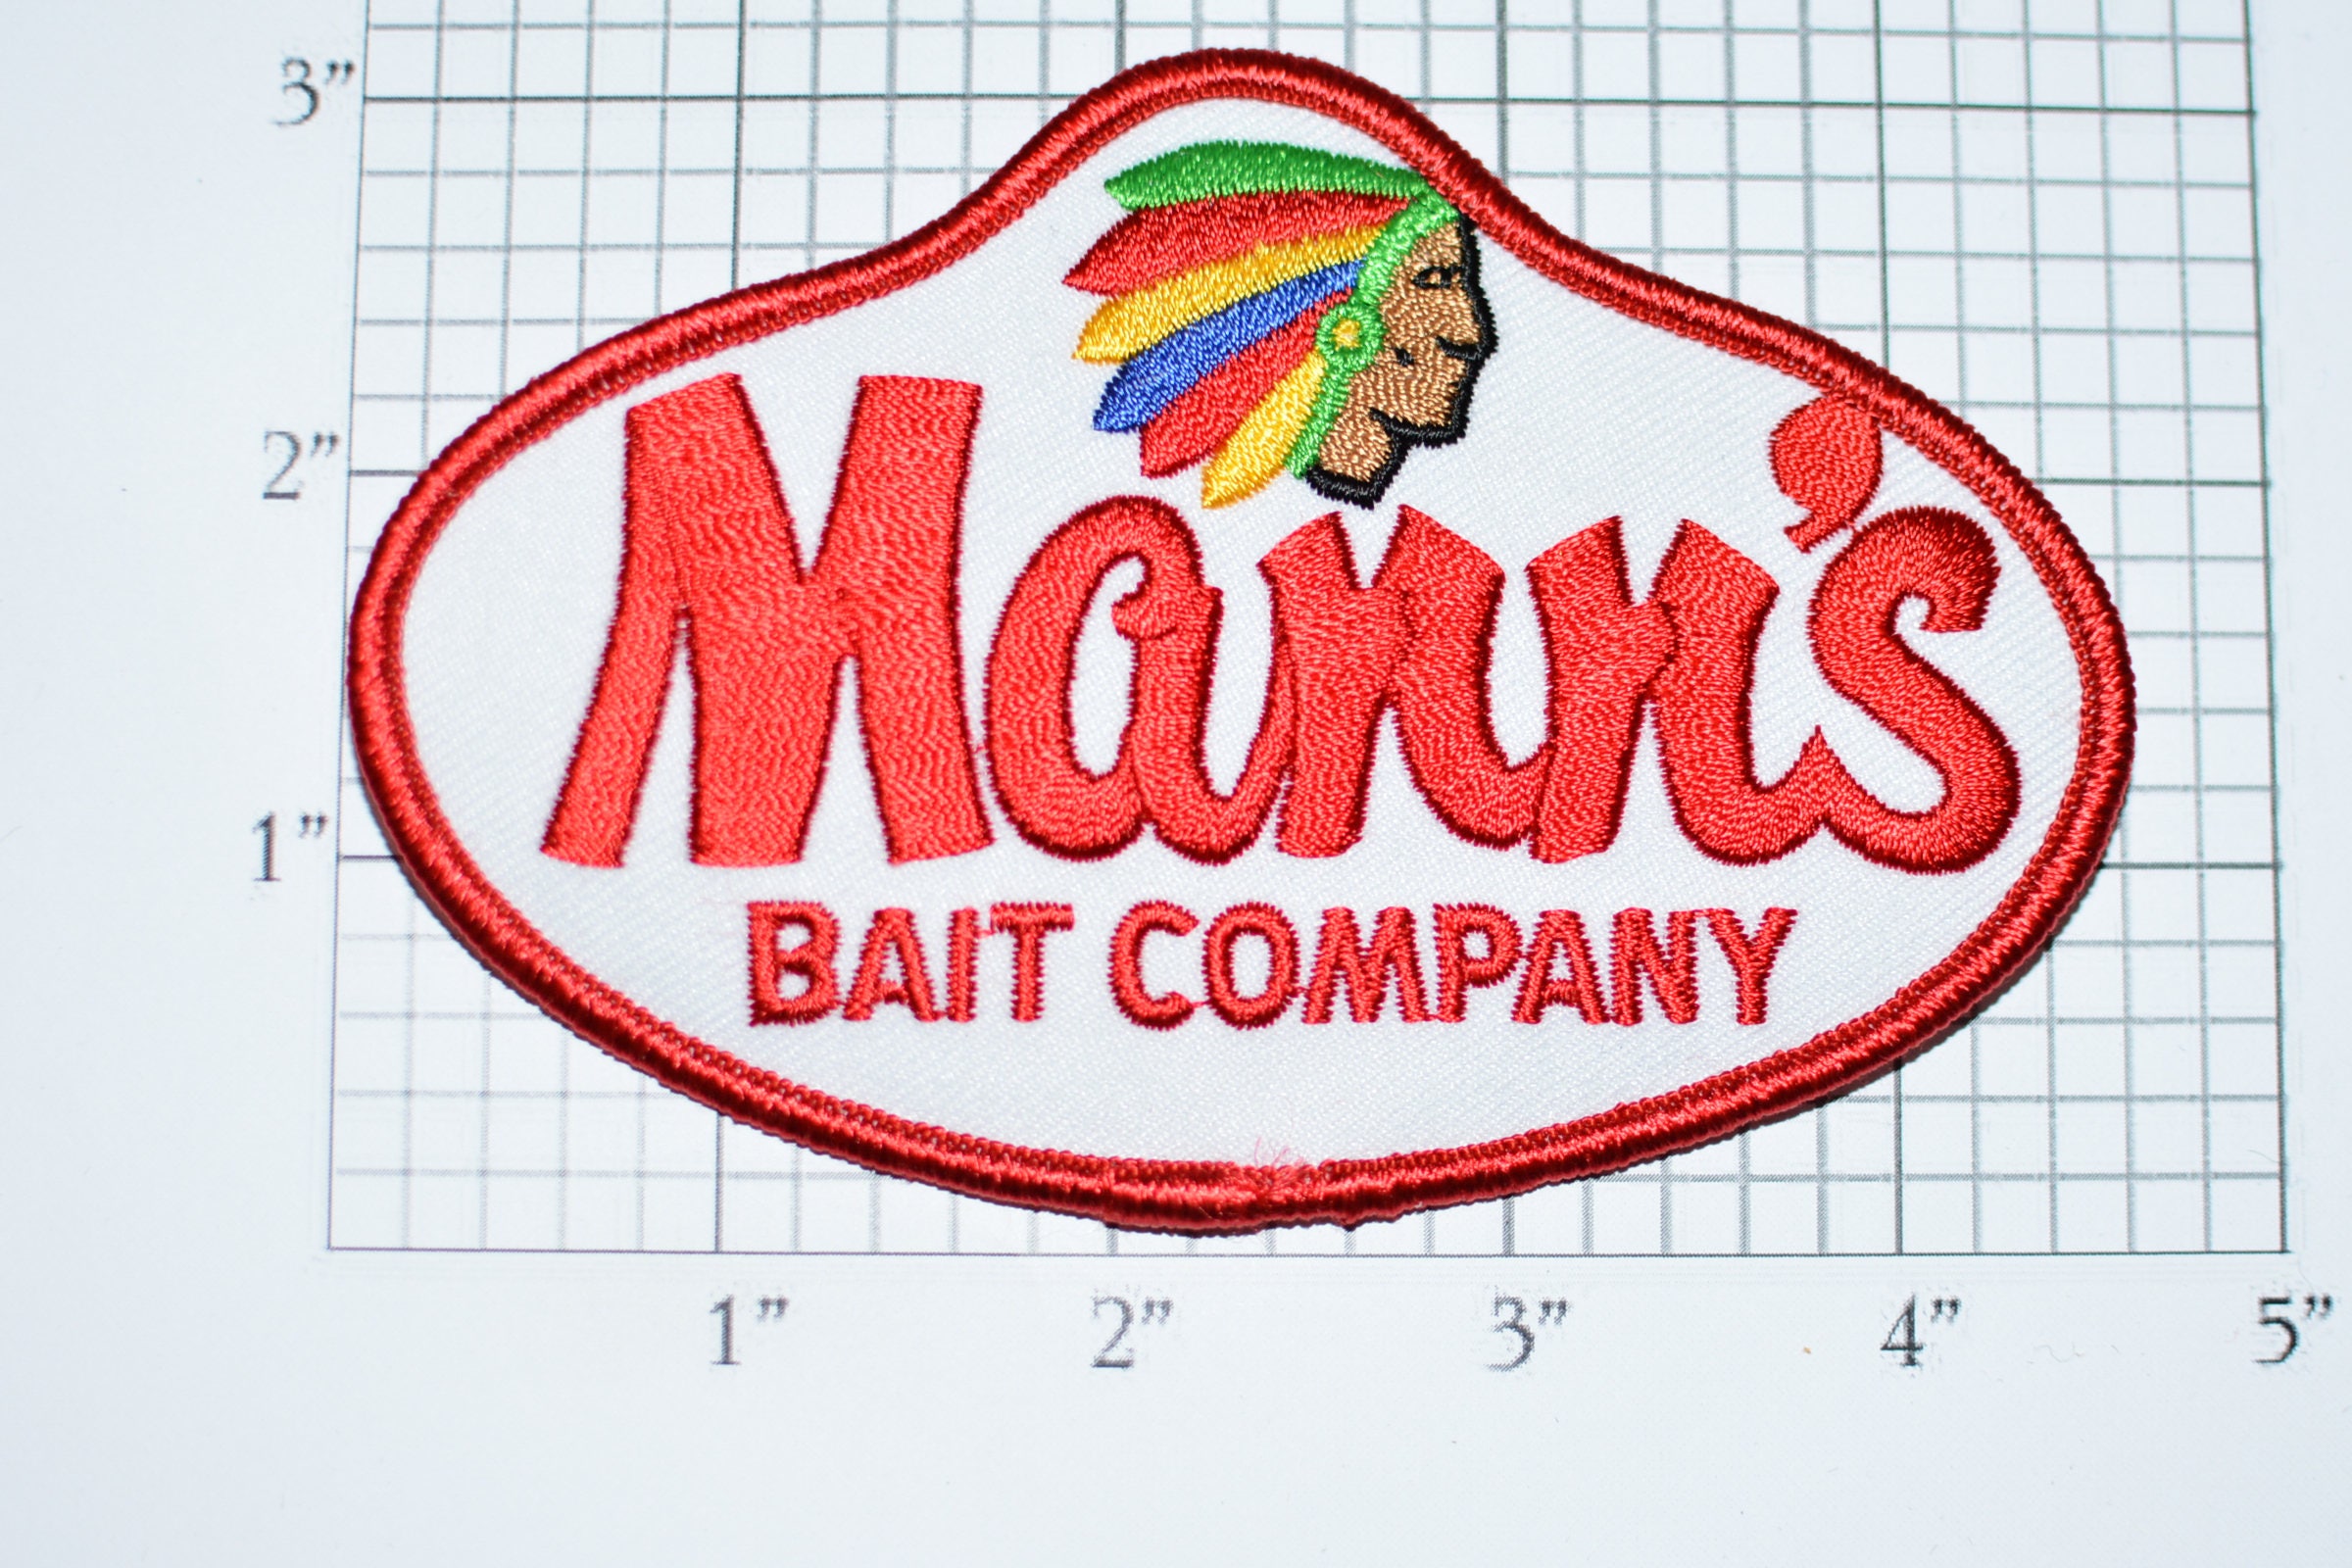 Mann's Bait Company Fishing Tackle Gear Iron-on Embroidered